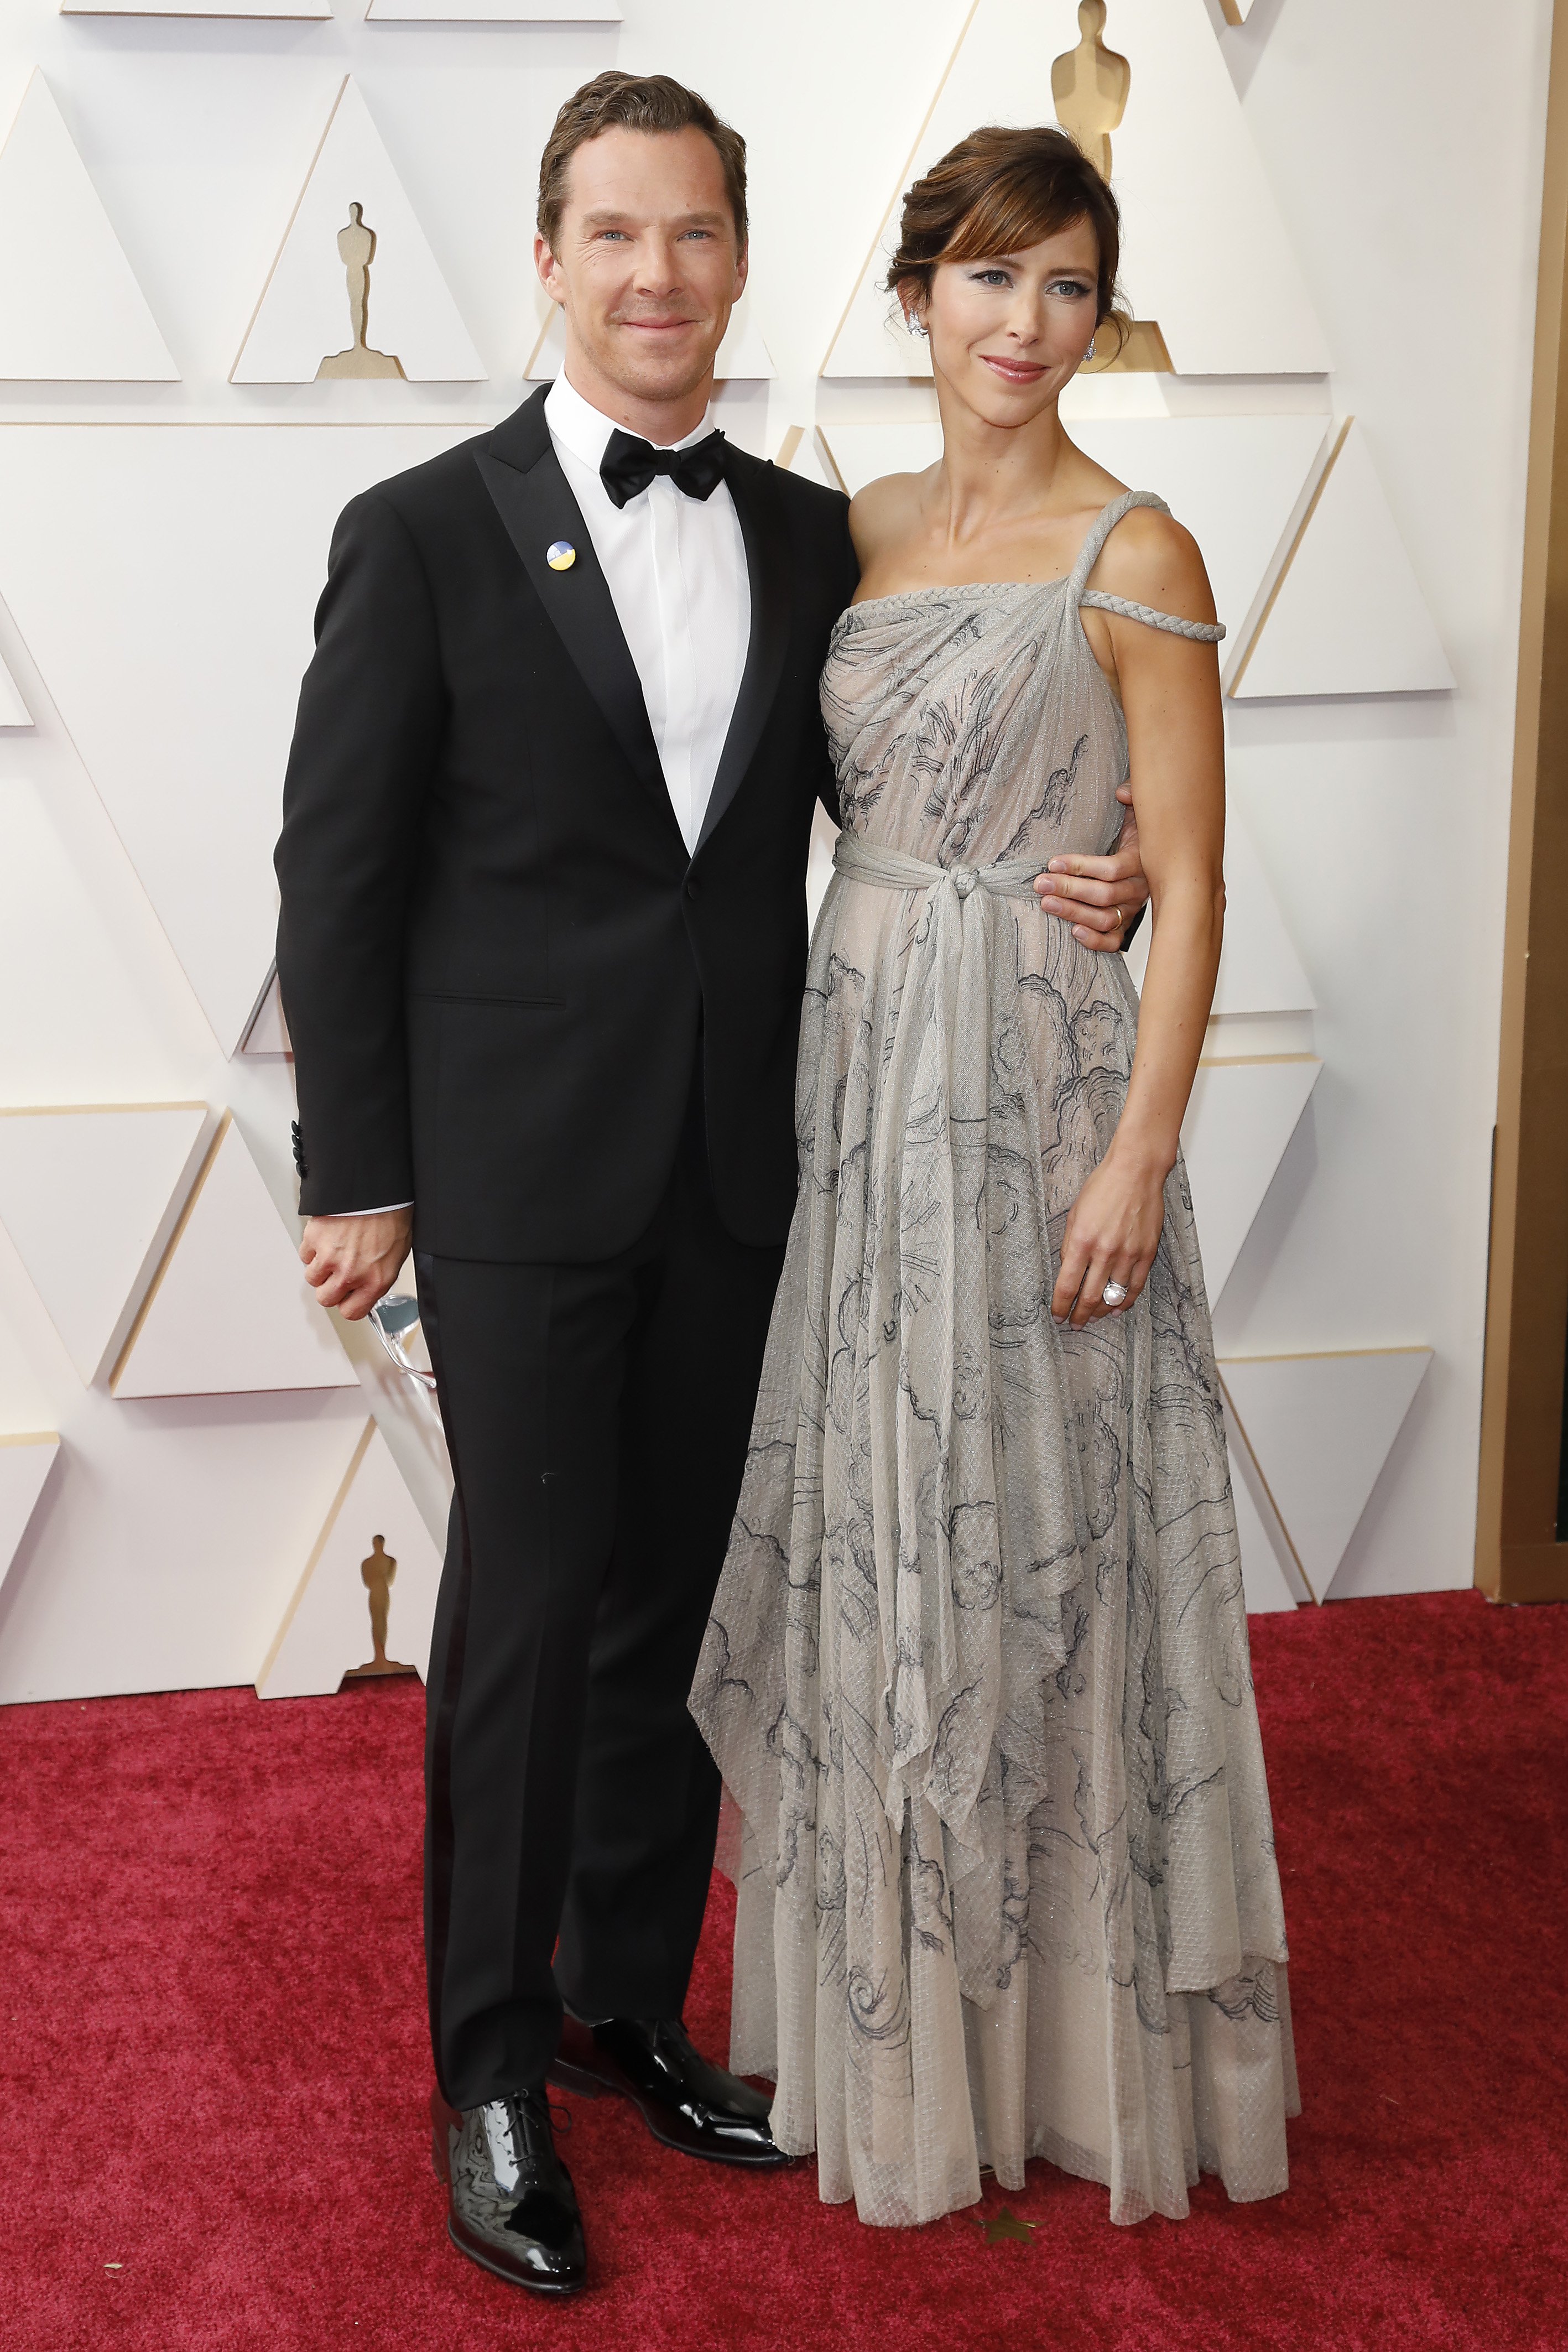 Benedict Cumberbatch and his wife Sophie Turner attend the 94th Academy Awards at the Dolby Theater on March 27, 2022, in Los Angeles, California. | Source: Getty Images